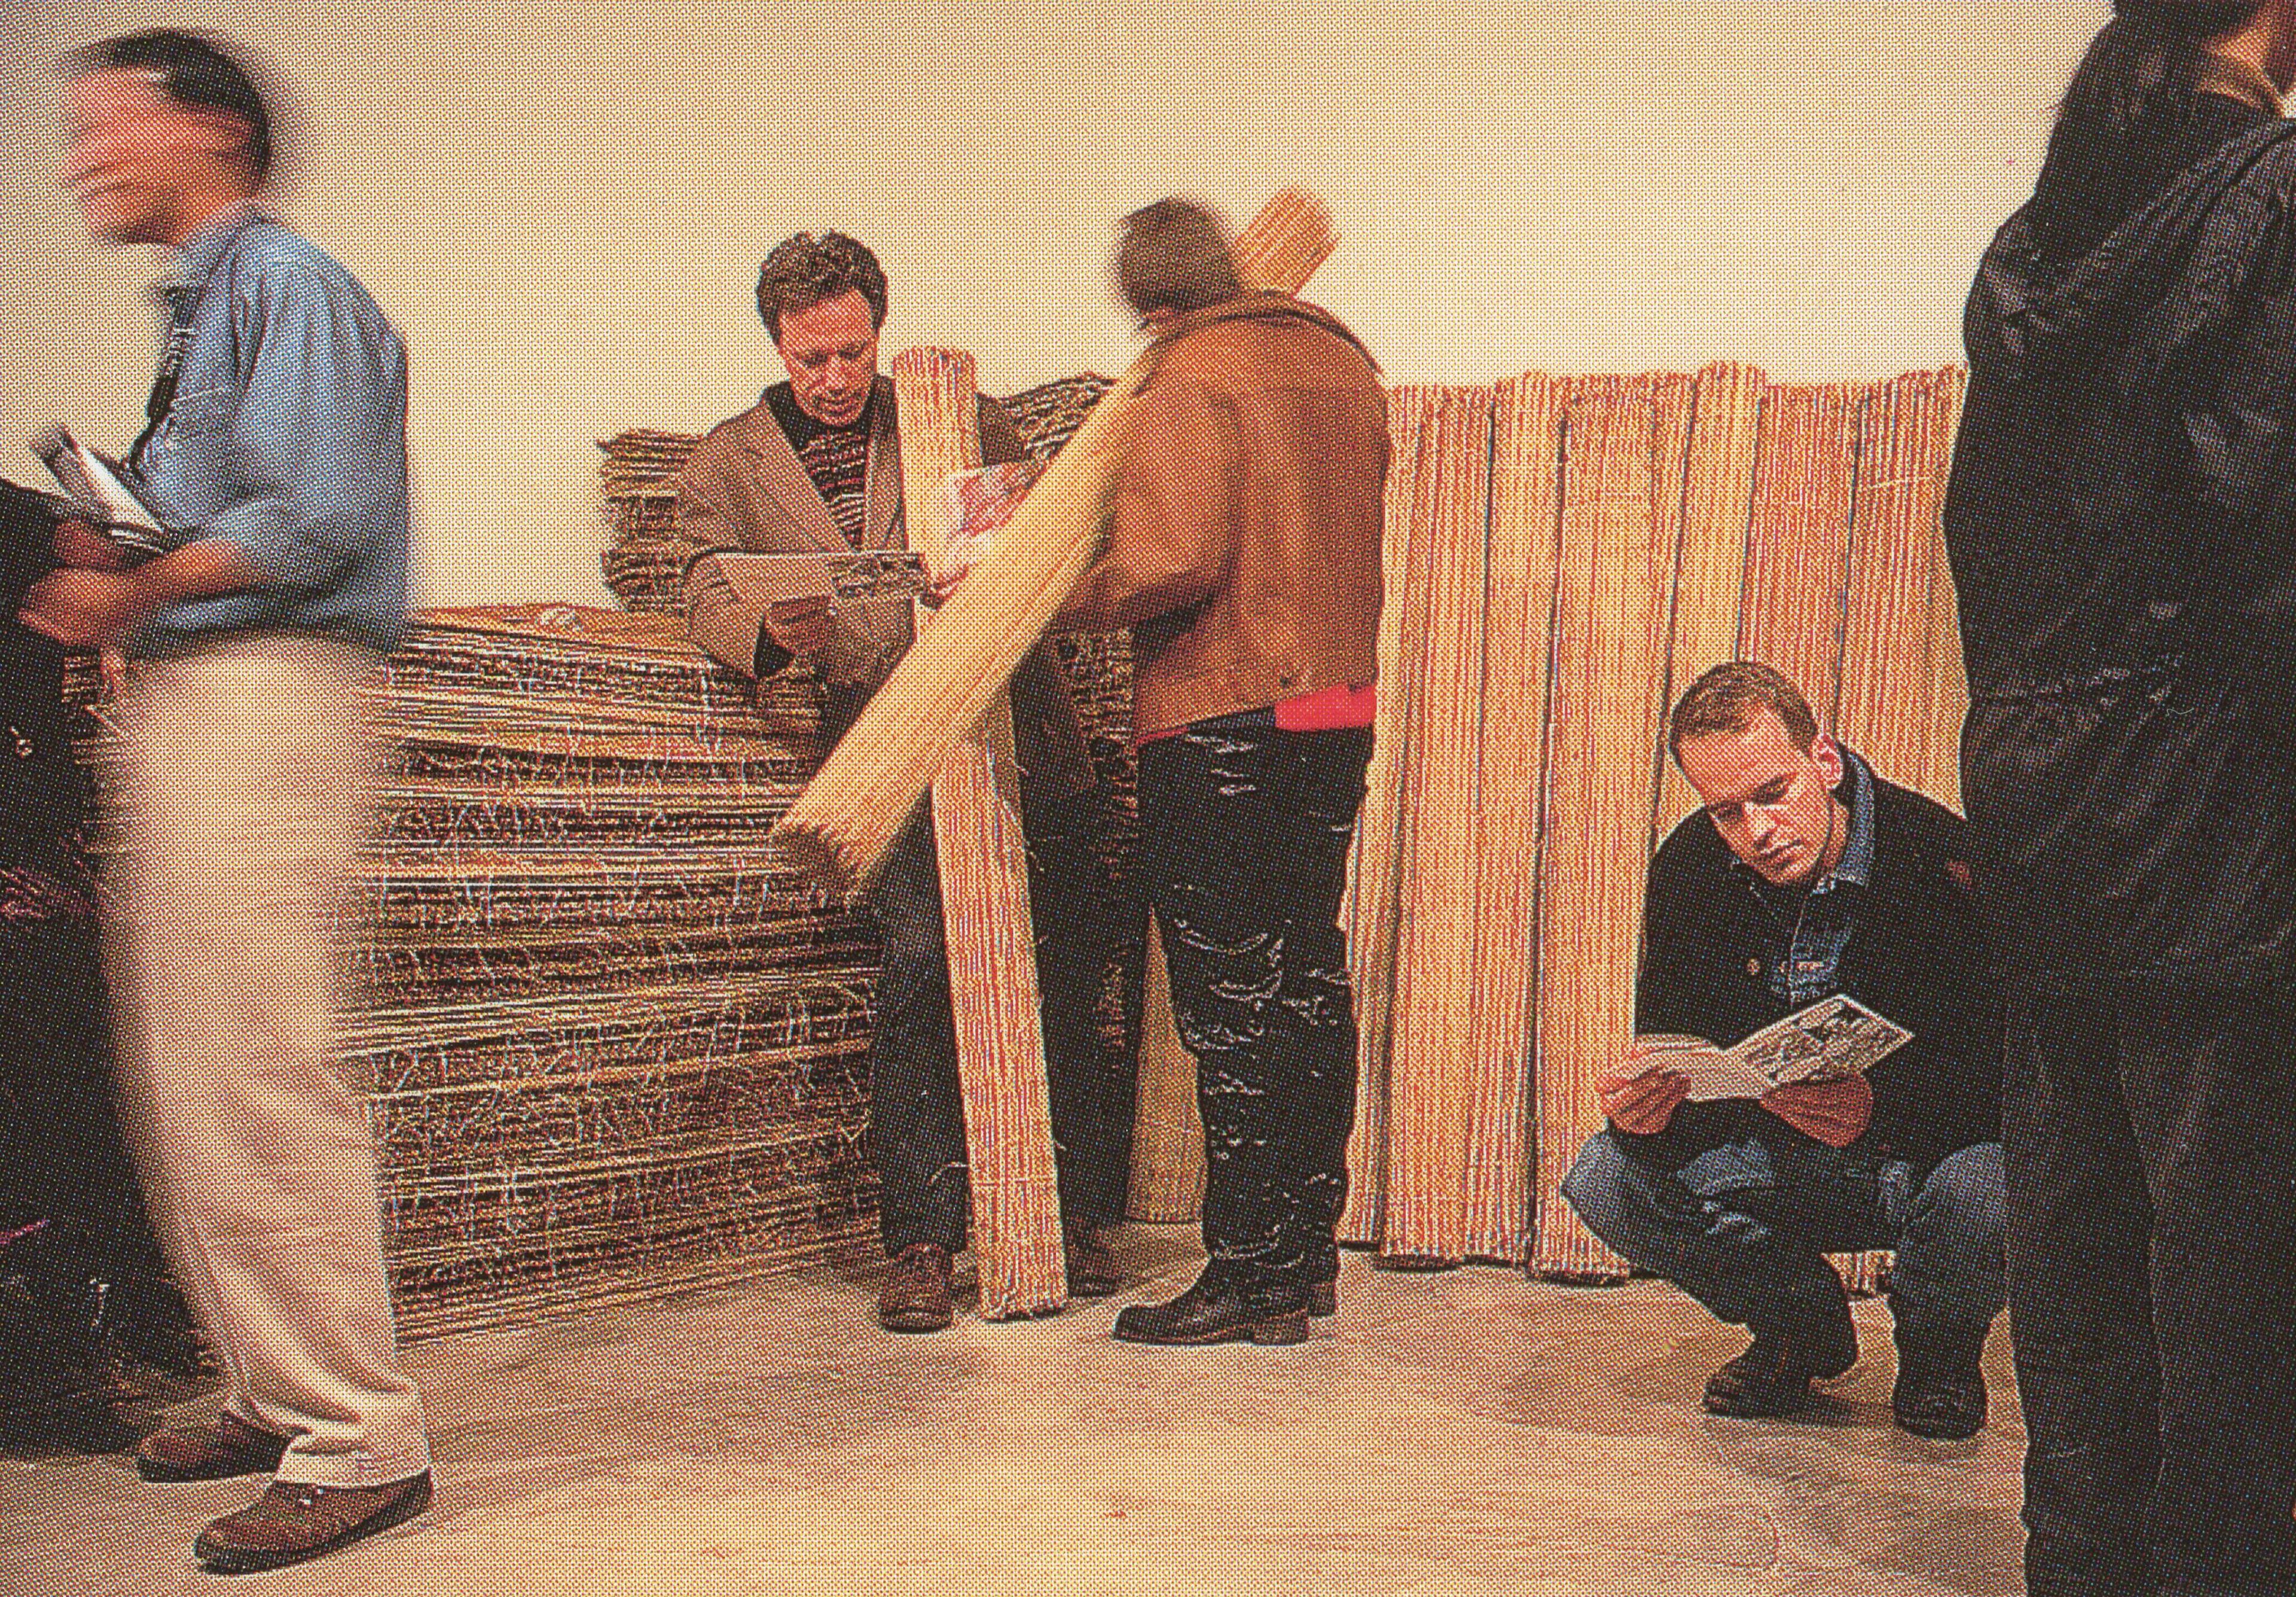 Many human-sized pillars made of straw are leaning against the gallery wall. Two standing people are reading pamphlets while holding those straw pillars. 